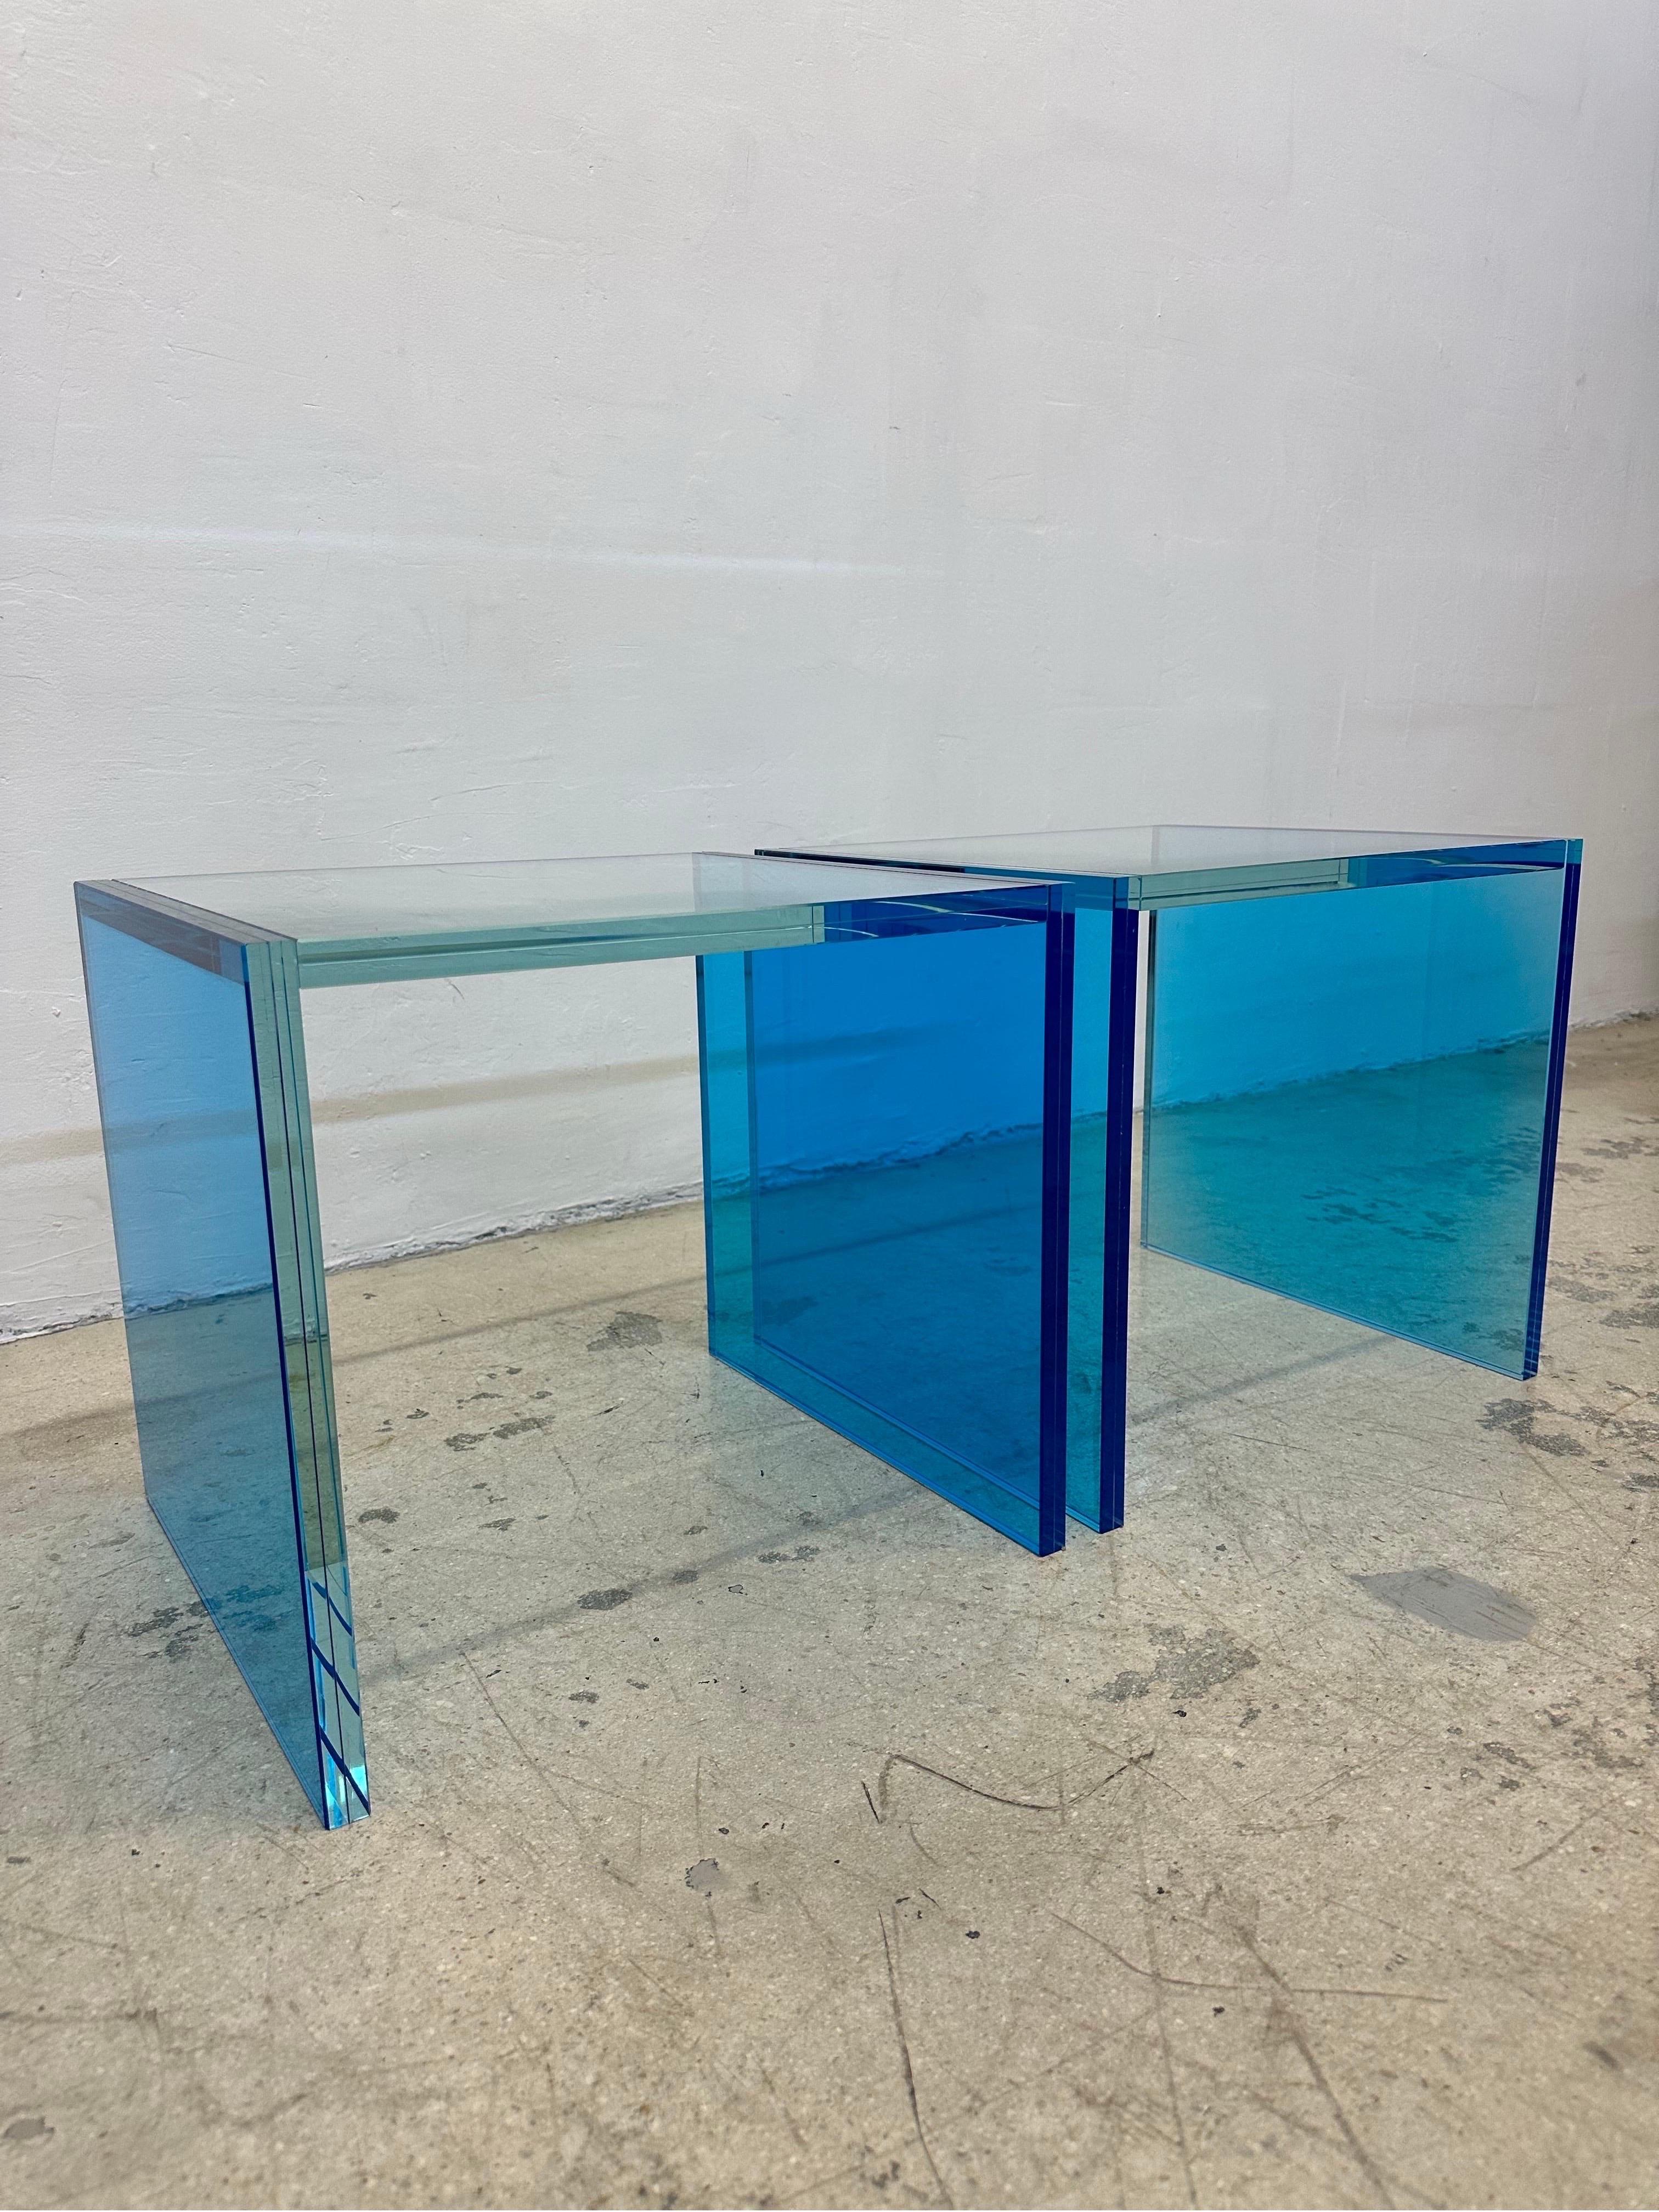 From the renowned glass architectural firm Santambrogio Milano, this pair of blue glass side tables were designed for the Simplicity Collection and debuted at Salone de Mobile, 2022.

As light passes through, the blue shade of glass transforms the